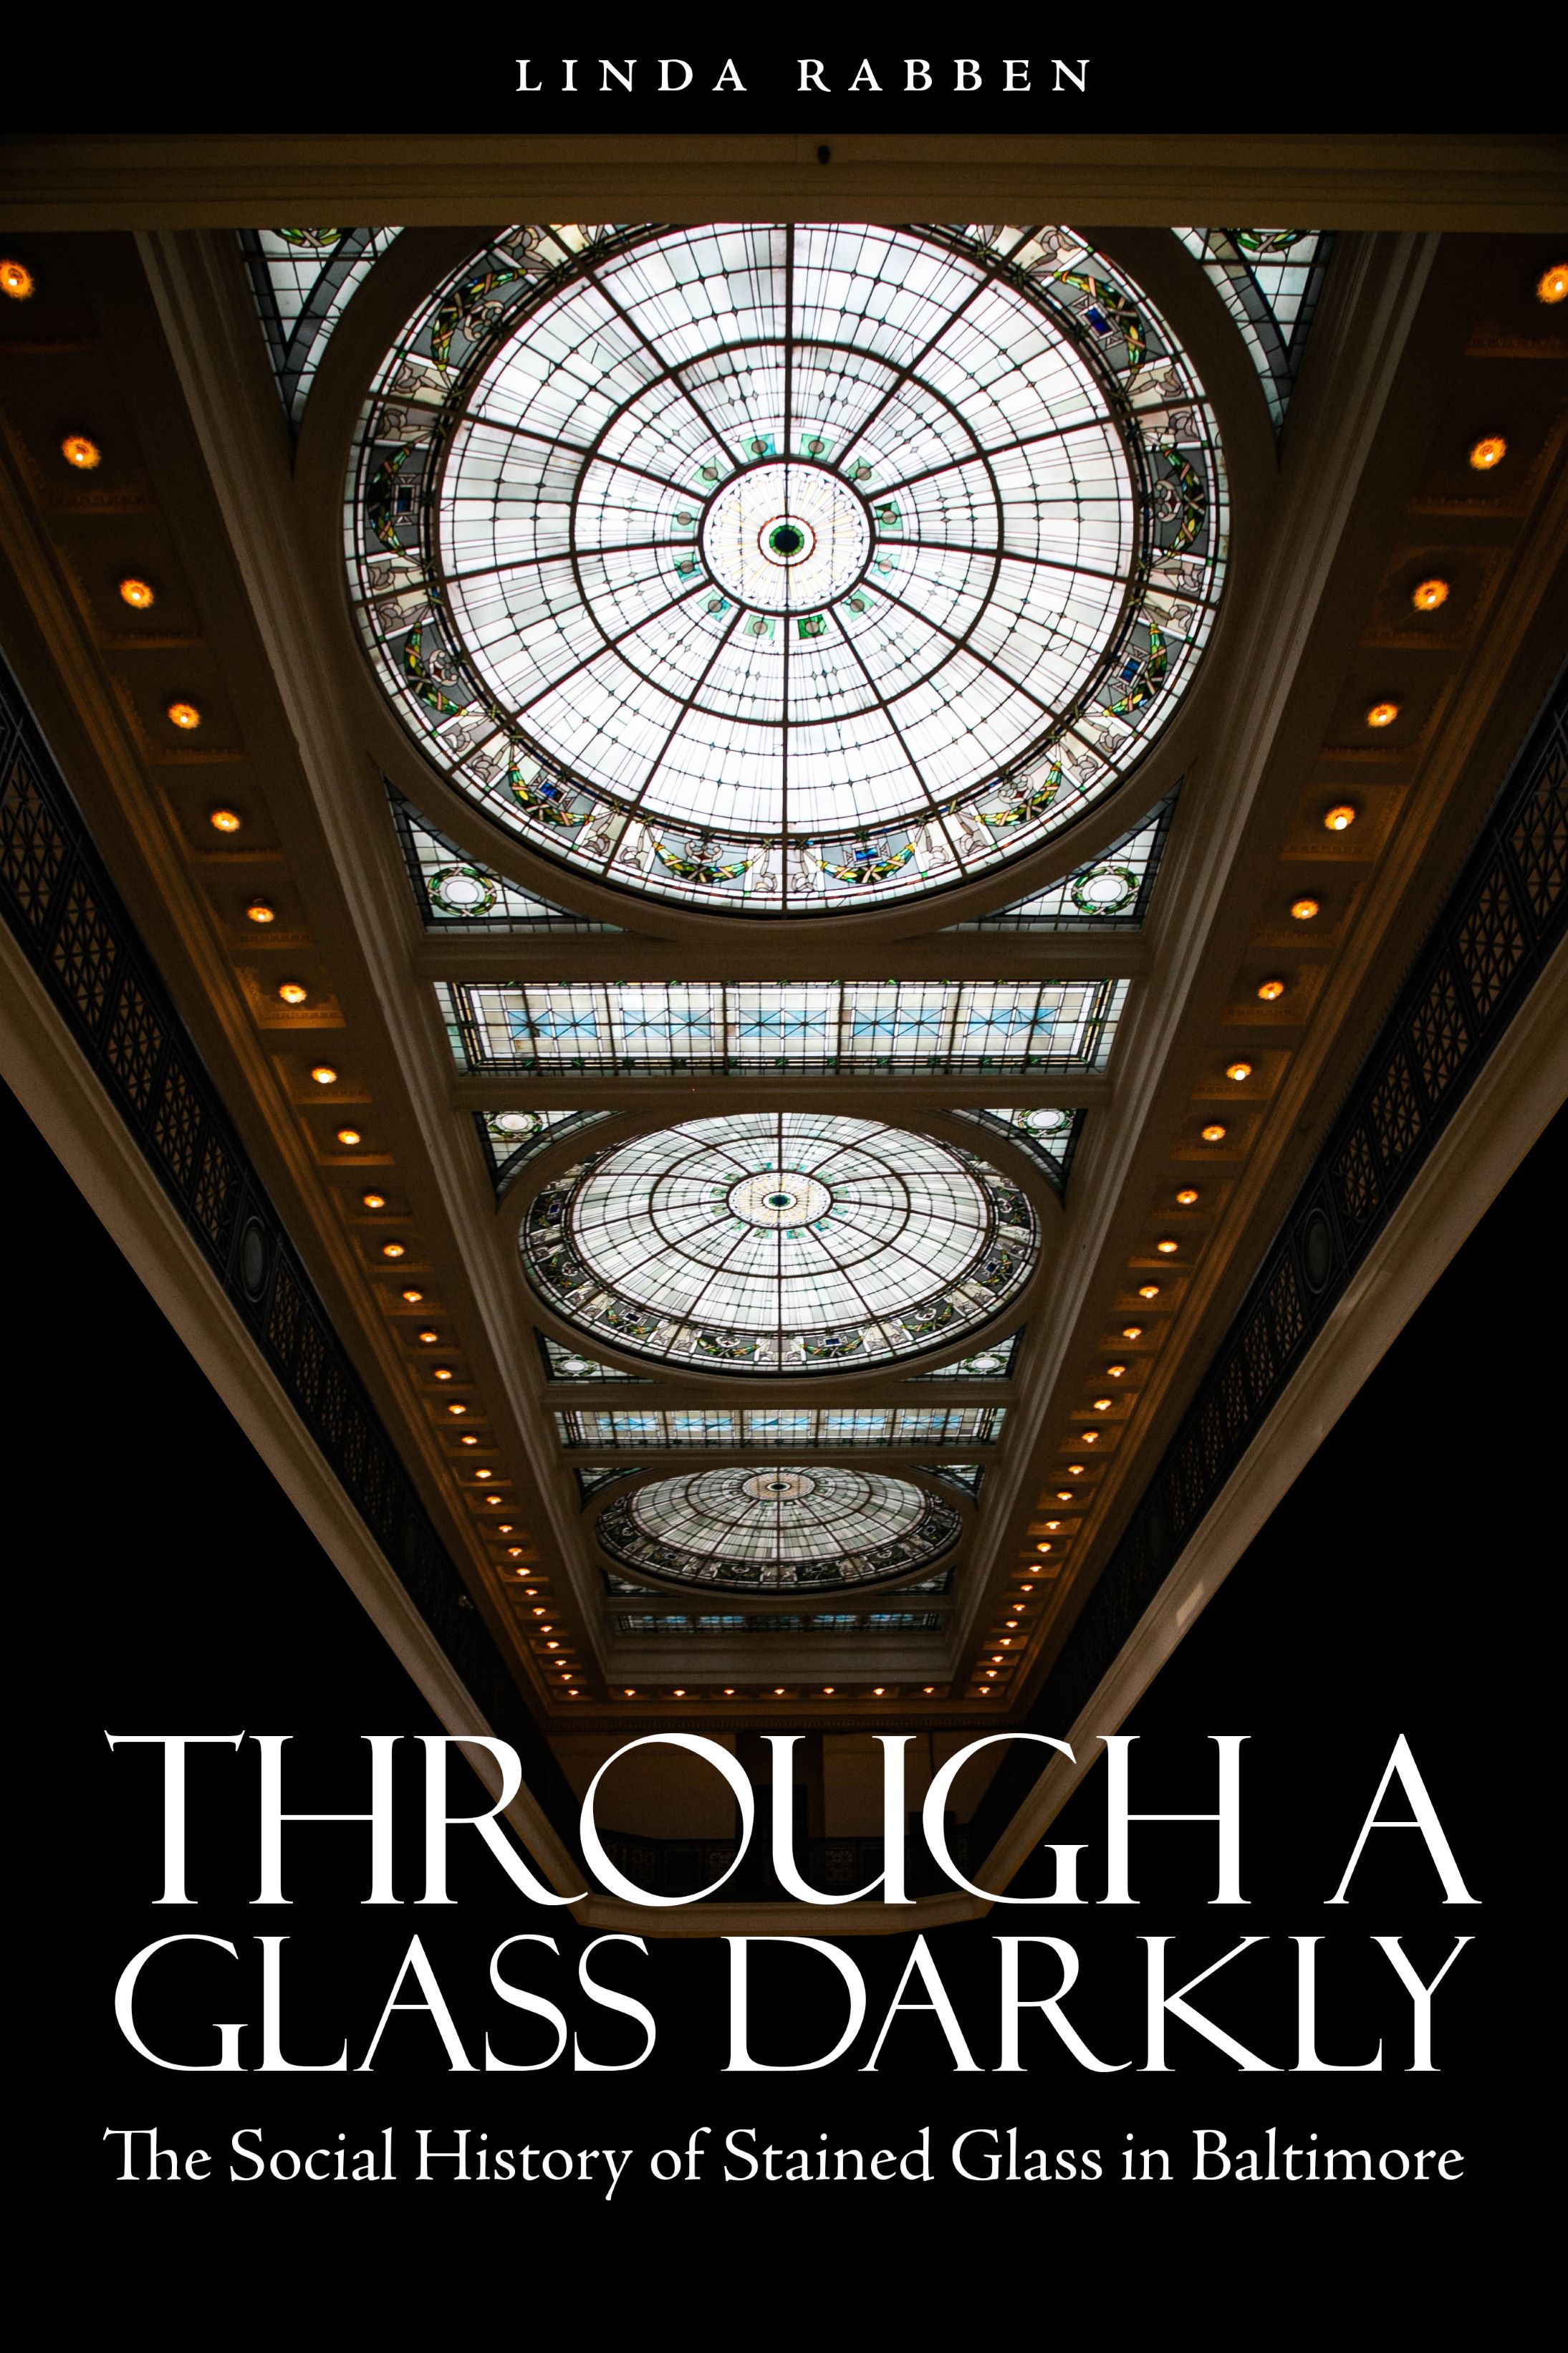 book cover showing triple laylights, Pennsylvania Station, Baltimore. Photo by James Benoit.